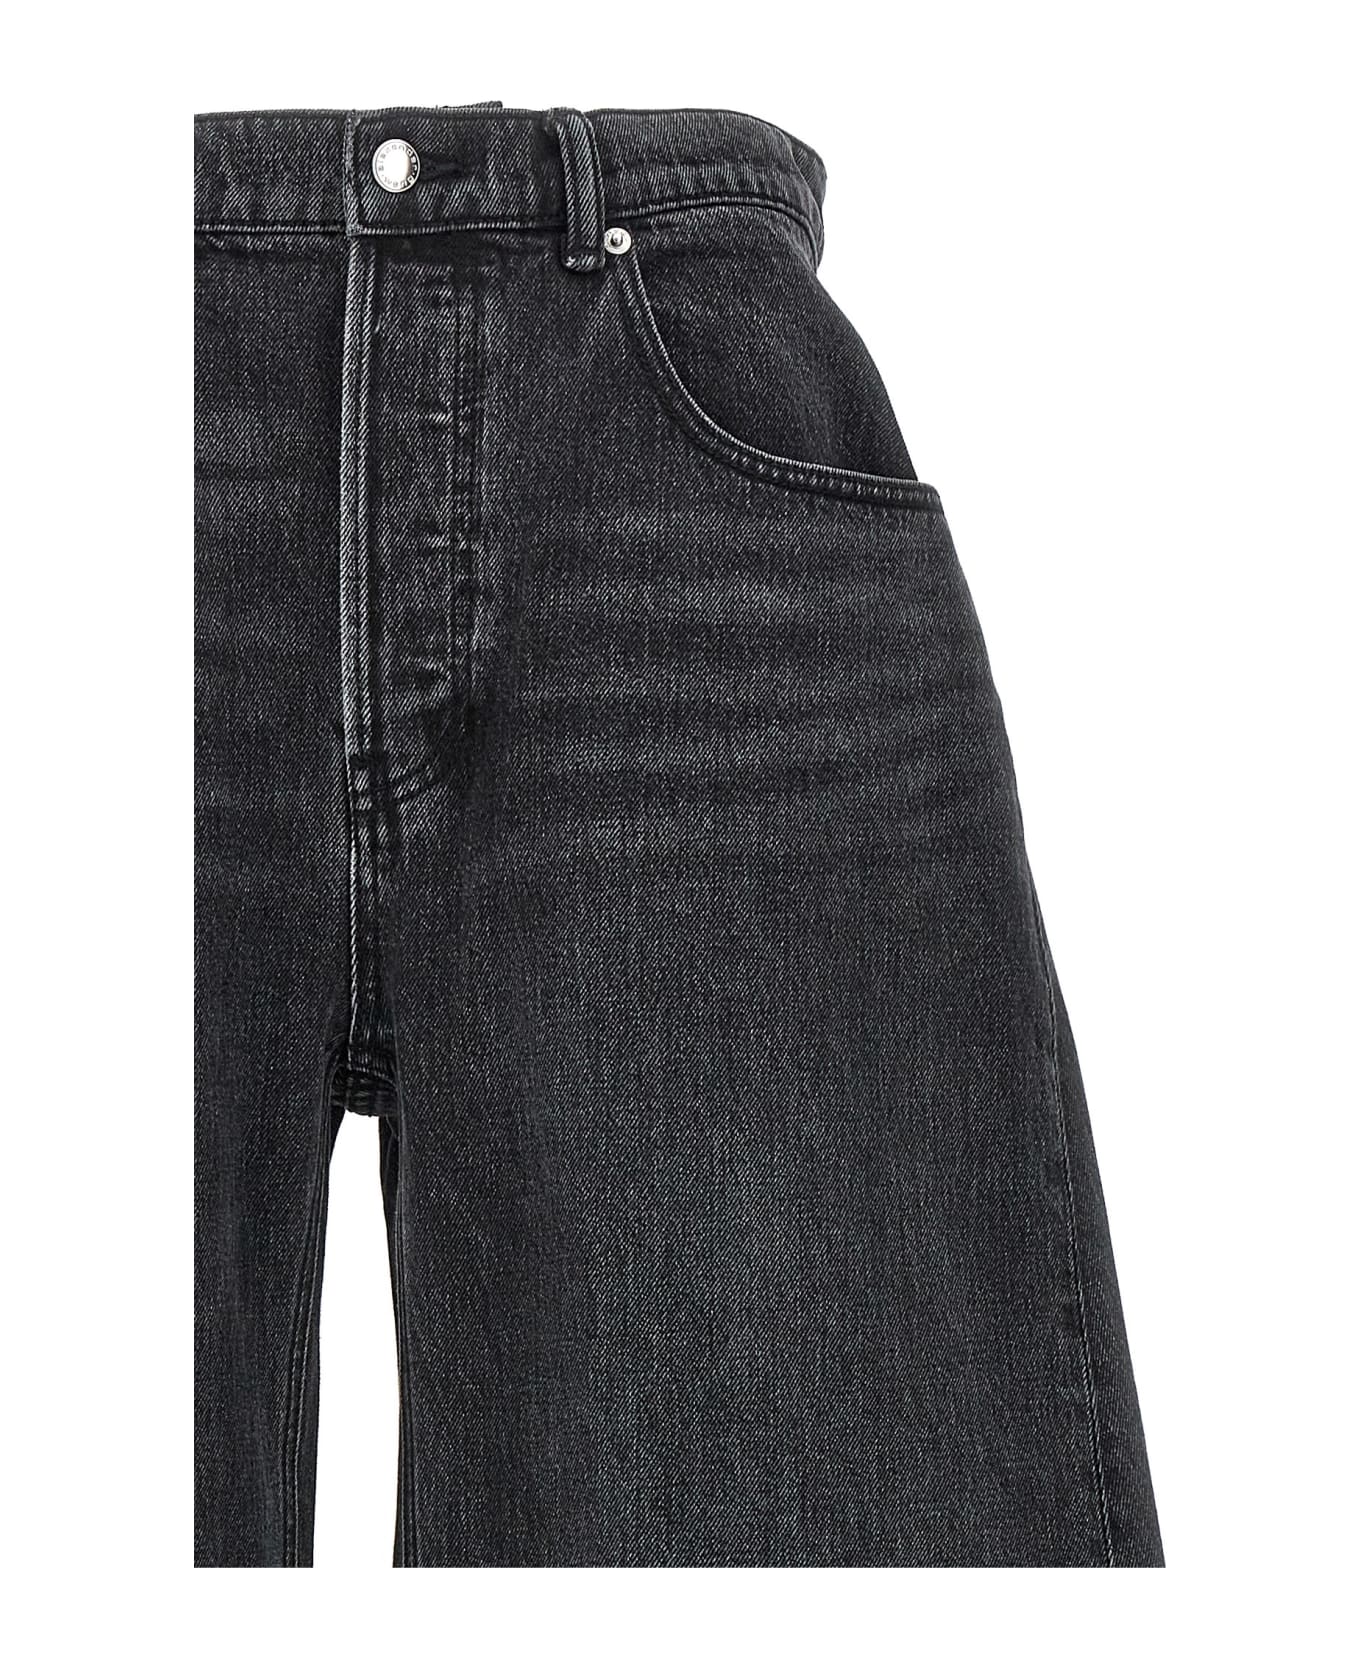 Alexander Wang 'oversized Rounded' Jeans - Grey Aged デニム